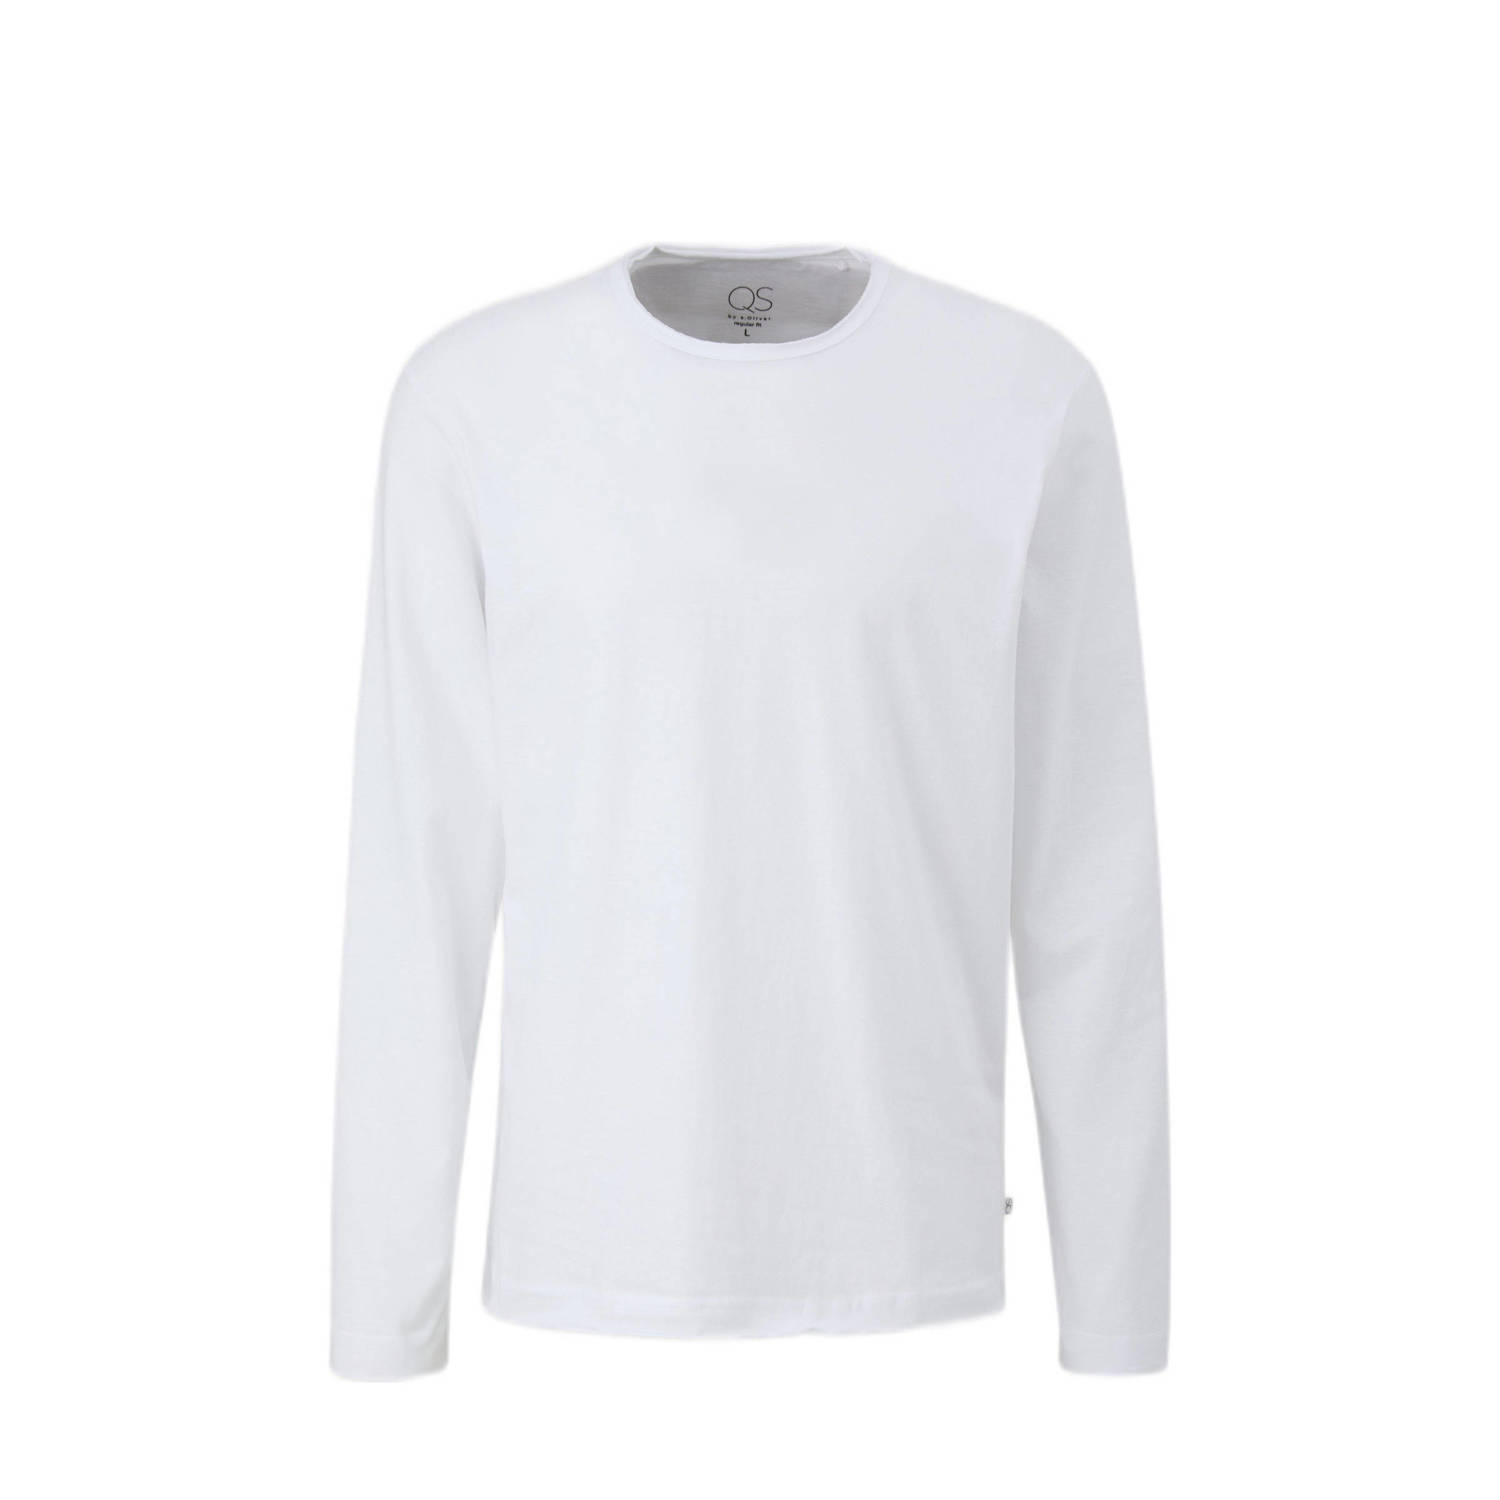 Q S by s.Oliver regular fit longsleeve wit